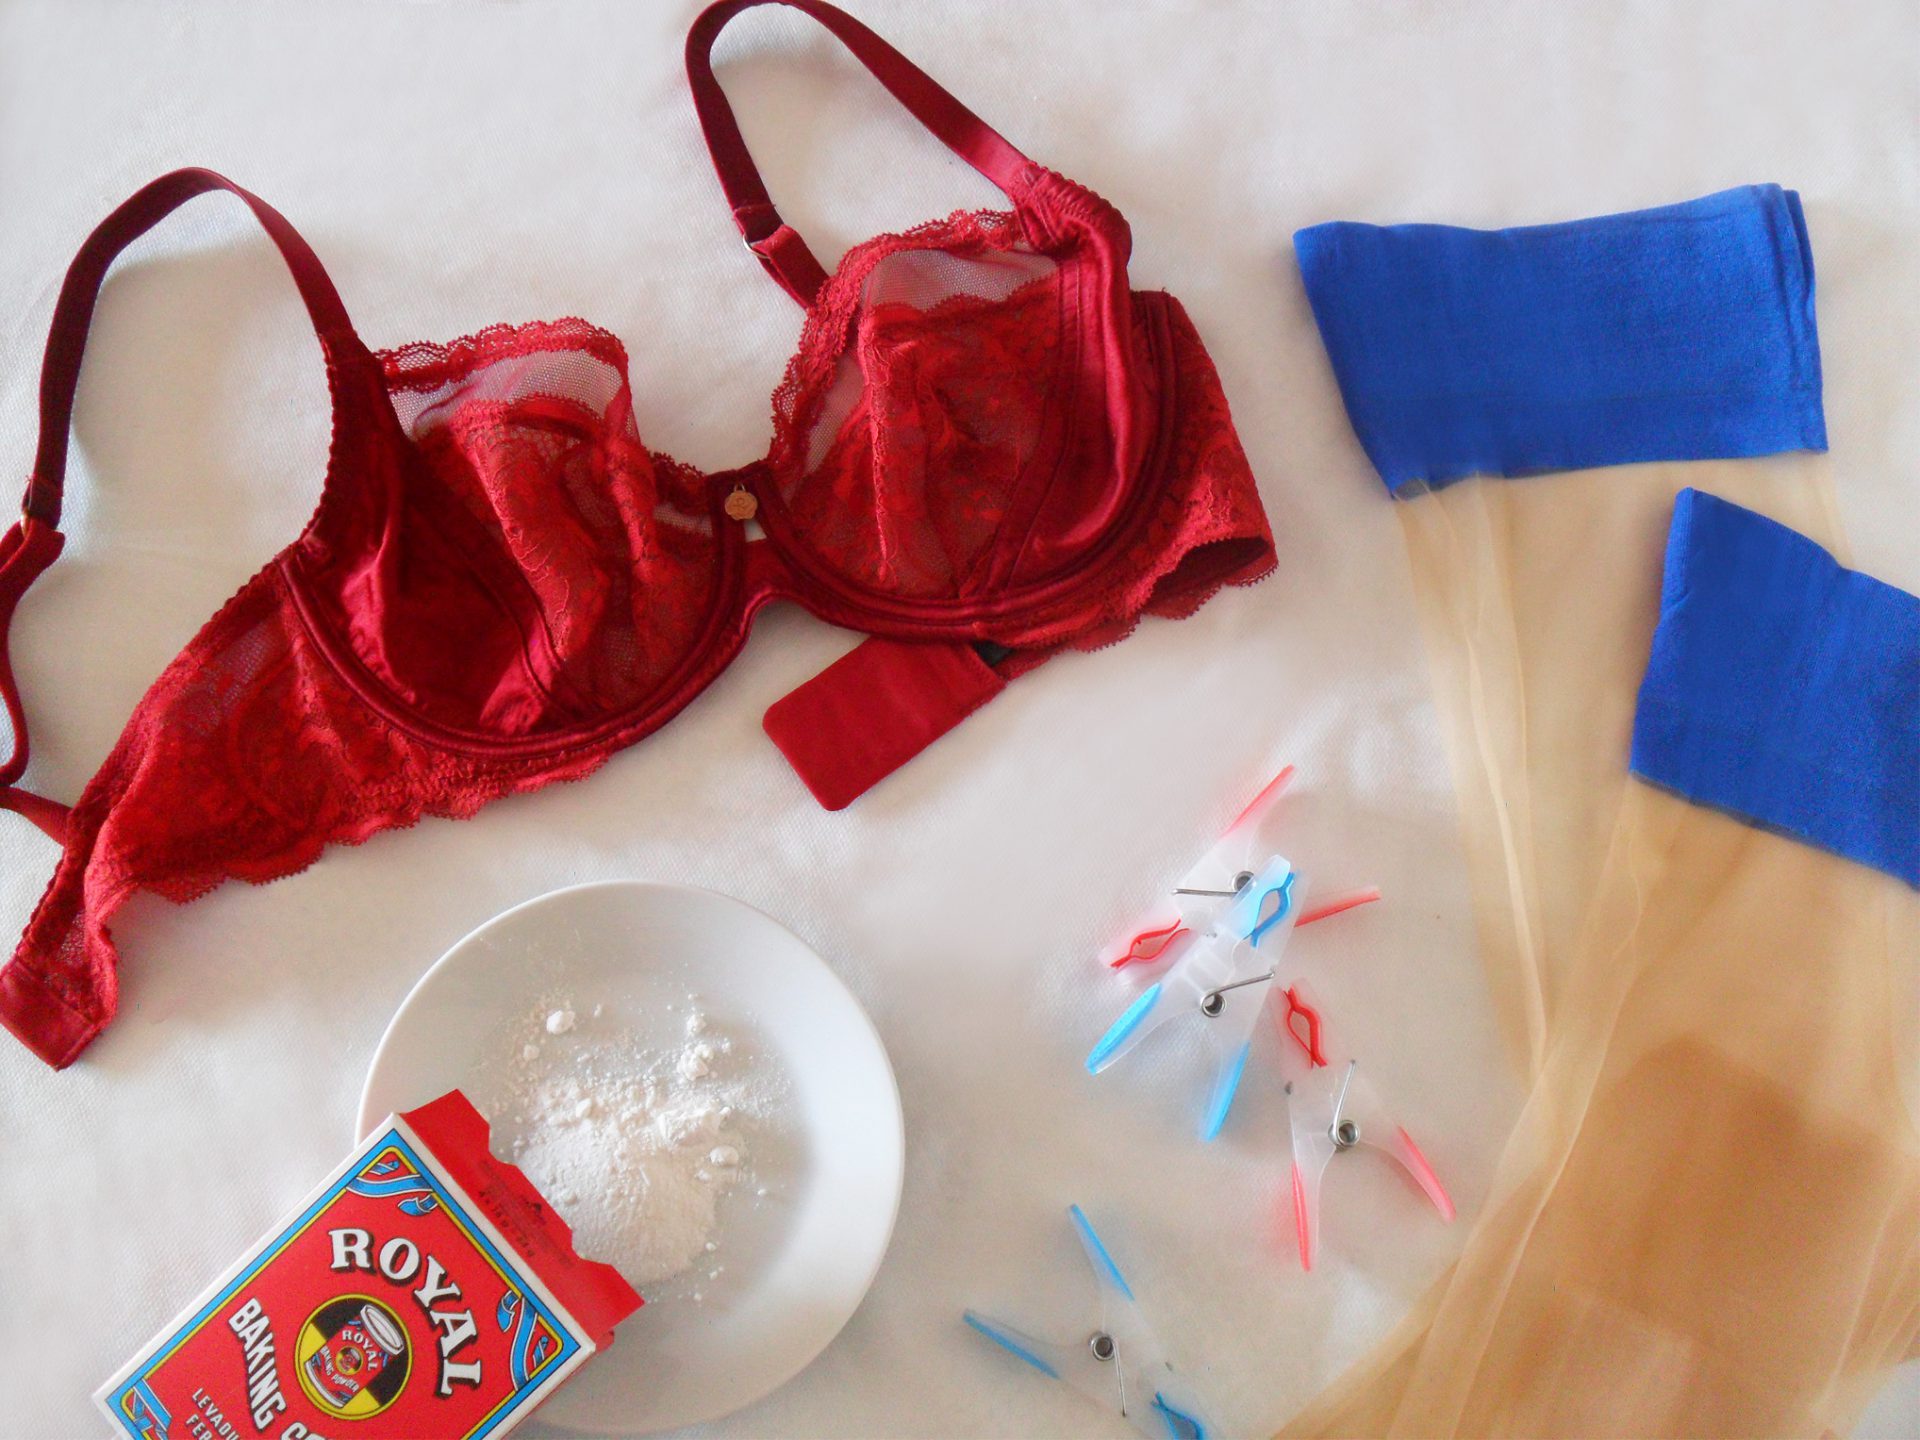 How to Air Dry Lingerie Without That Awful Damp Smell